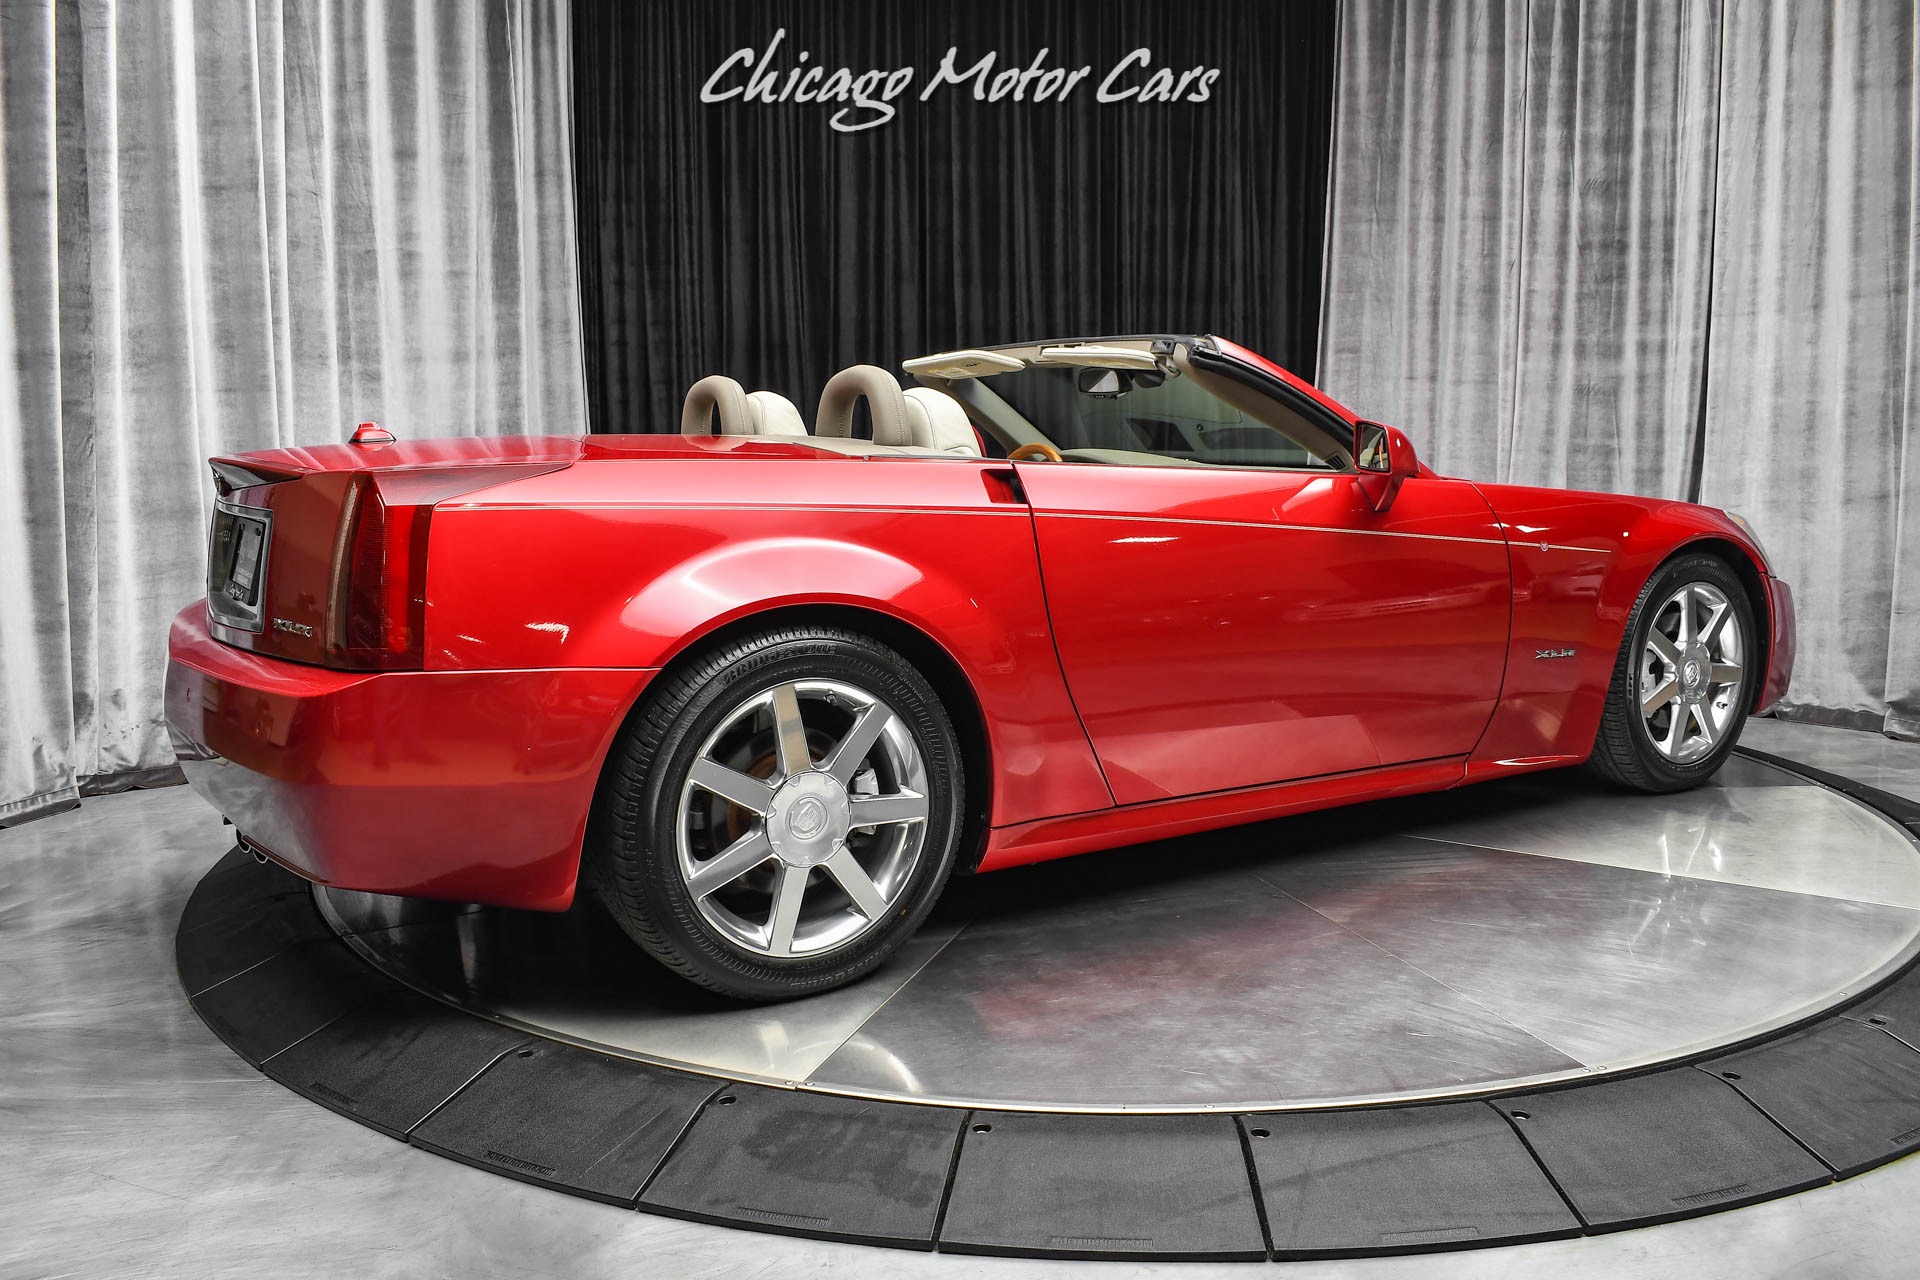 Used-2004-Cadillac-XLR-Extremely-Clean-Example-ONLY-66680-MILES-Navigation-BOSE-Sound